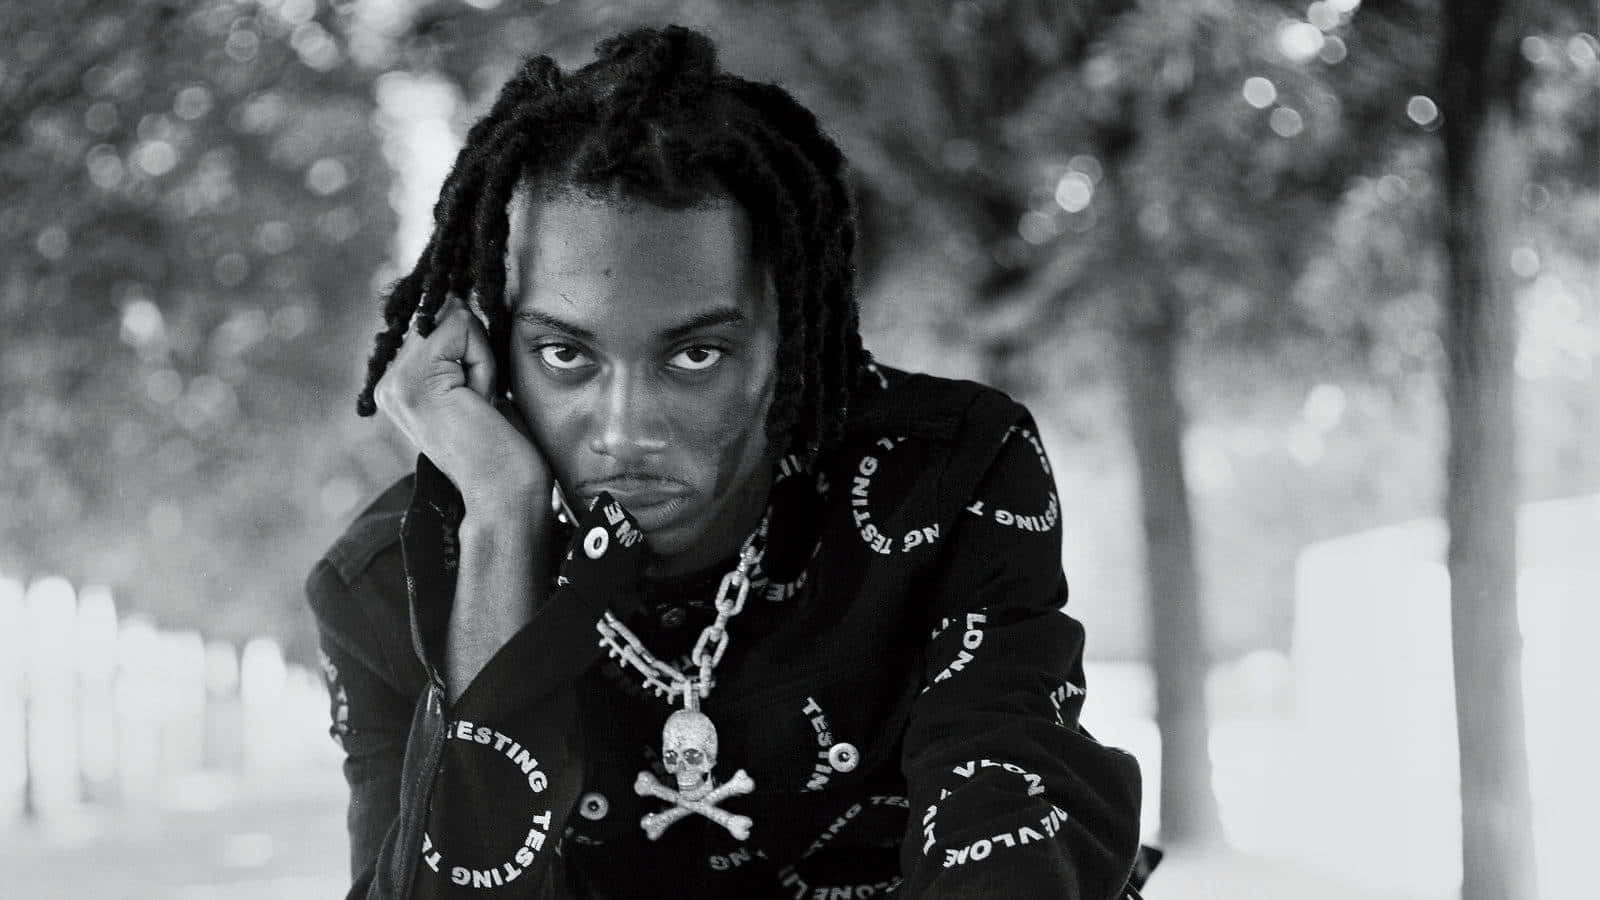 Playboi Carti jumps on the scene with a bold style